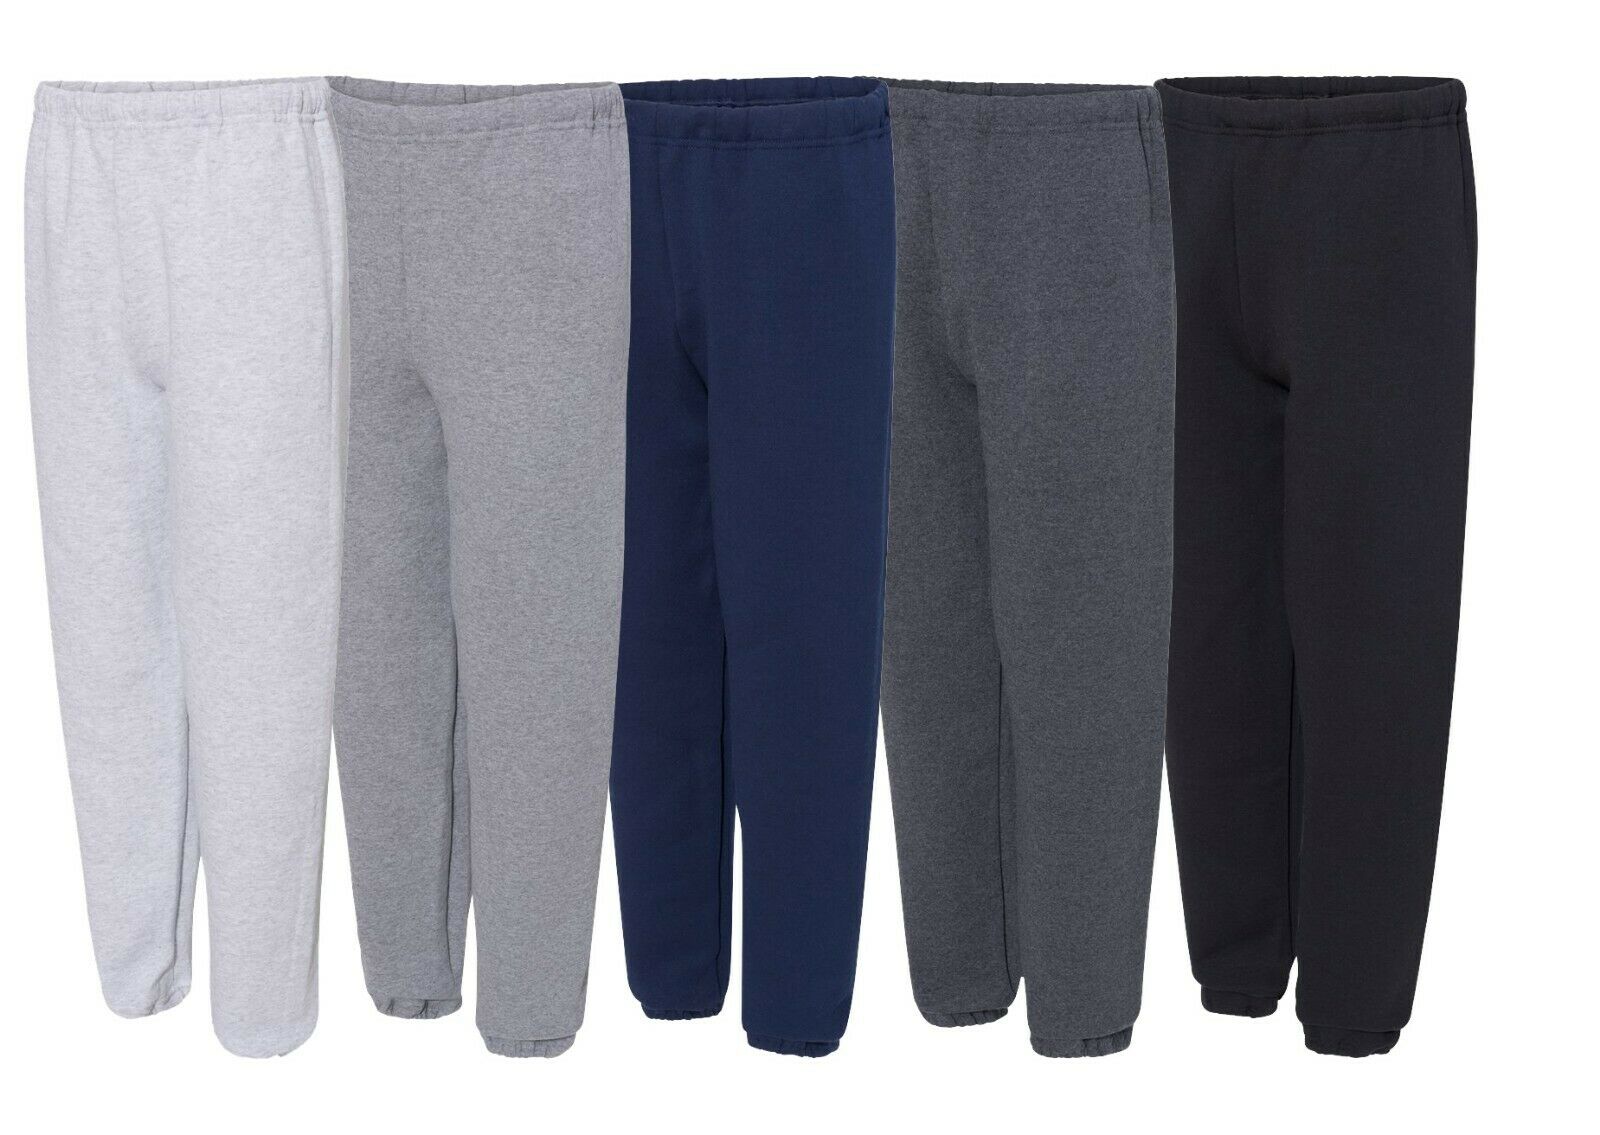 Russell Athletic Men's Dri-Power Closed-Bottom Sweatpants without Pocket